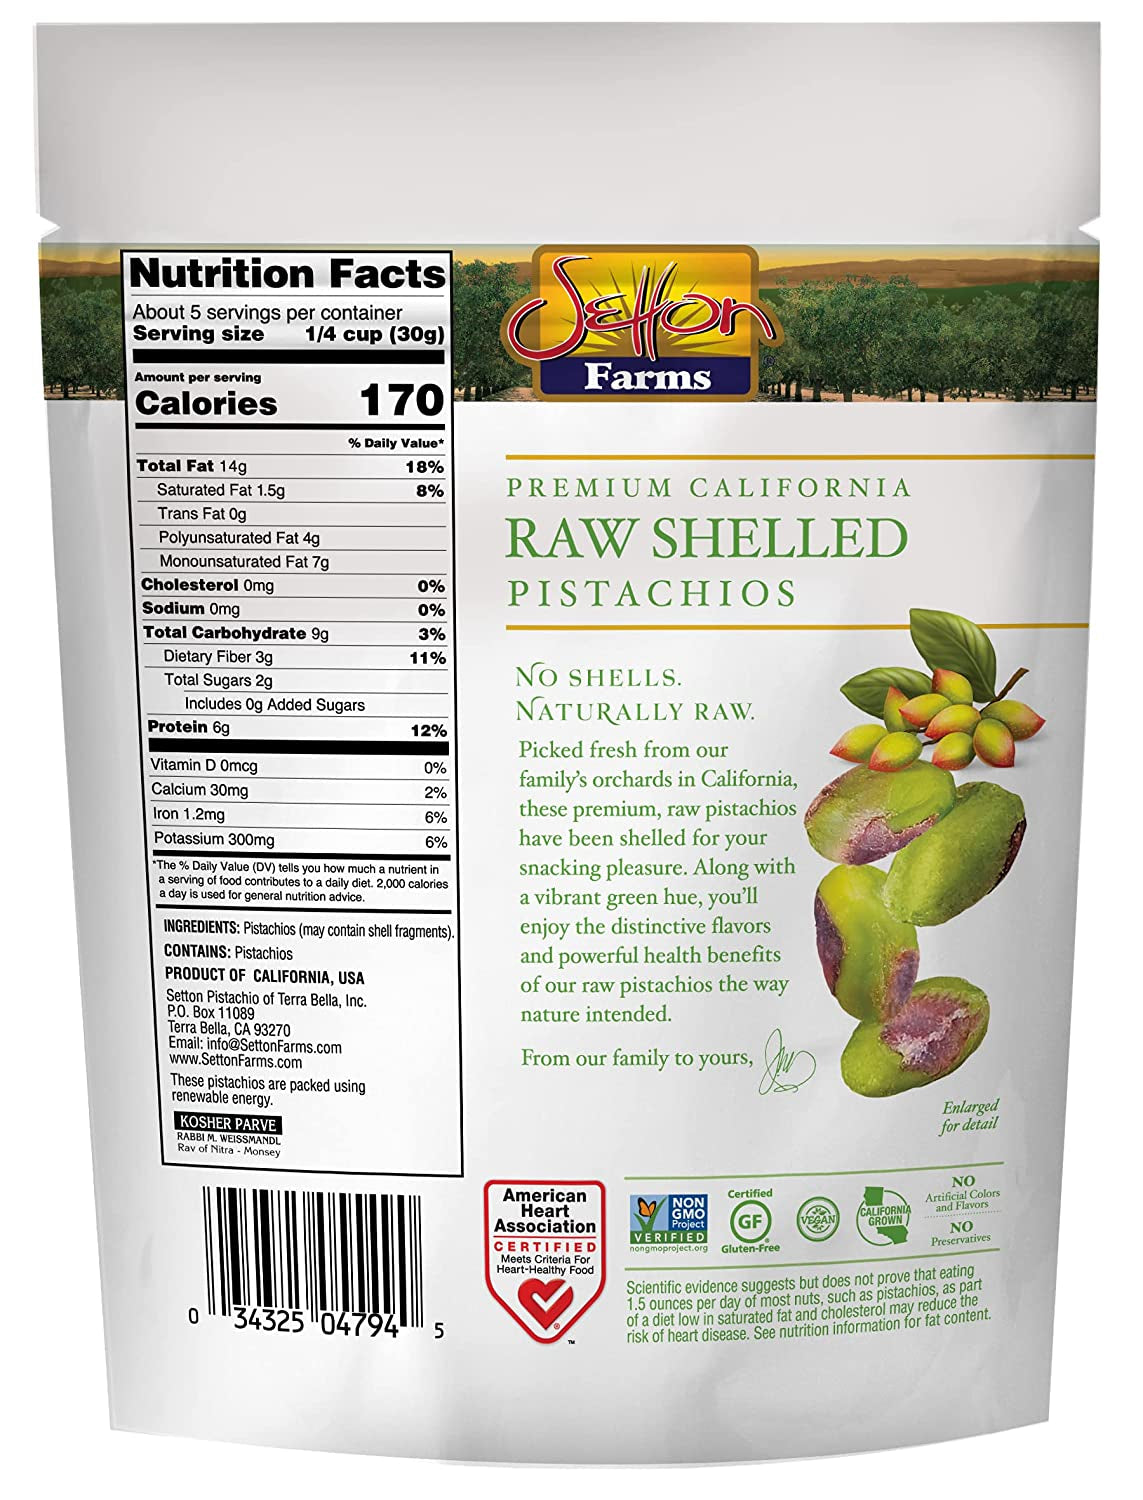 Setton Farms Naturally Raw Shelled Pistachios, No Shell, Non-Gmo Project Verified, Certified Gluten Free, Vegan and Kosher, Heart Healthy Snack, 5 Oz